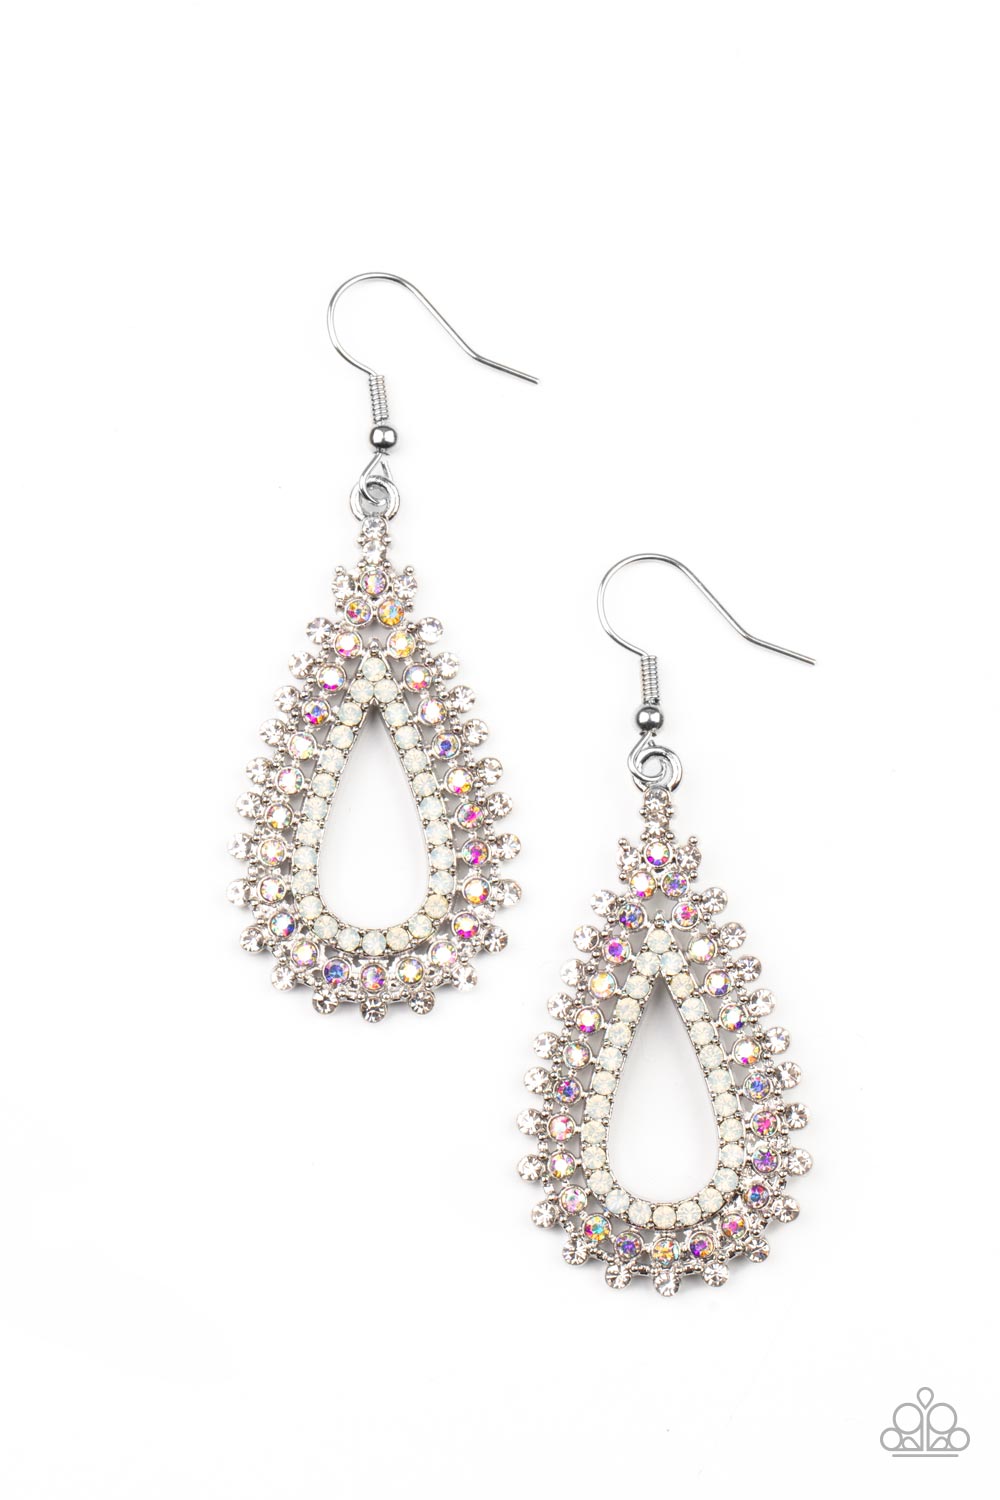 Paparazzi Accessories - The Works - Multi Earring